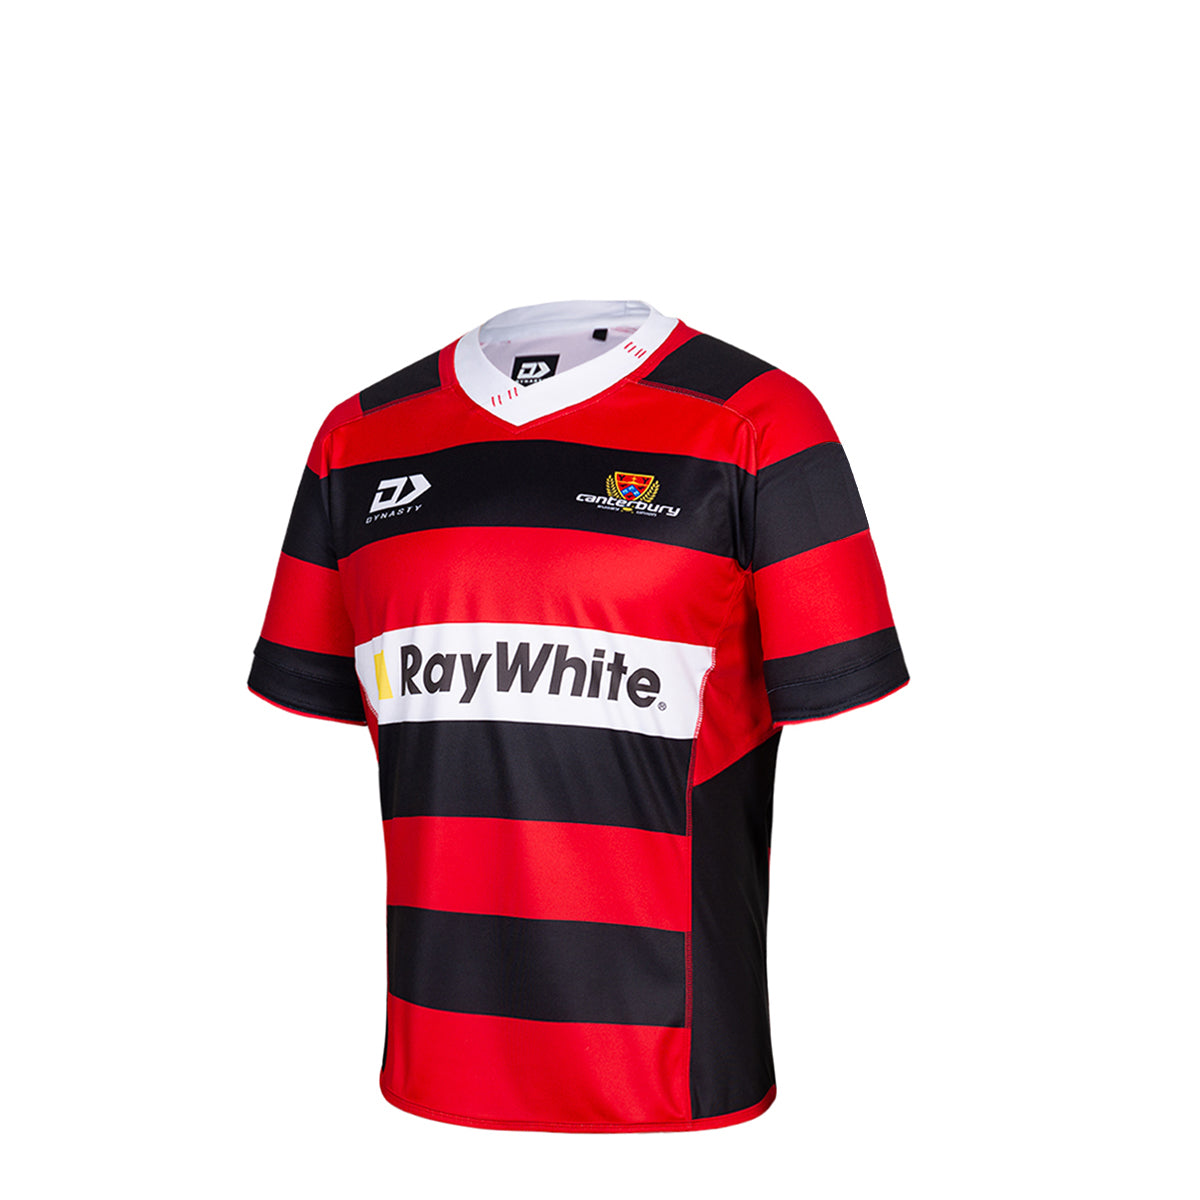 jersey rugby union